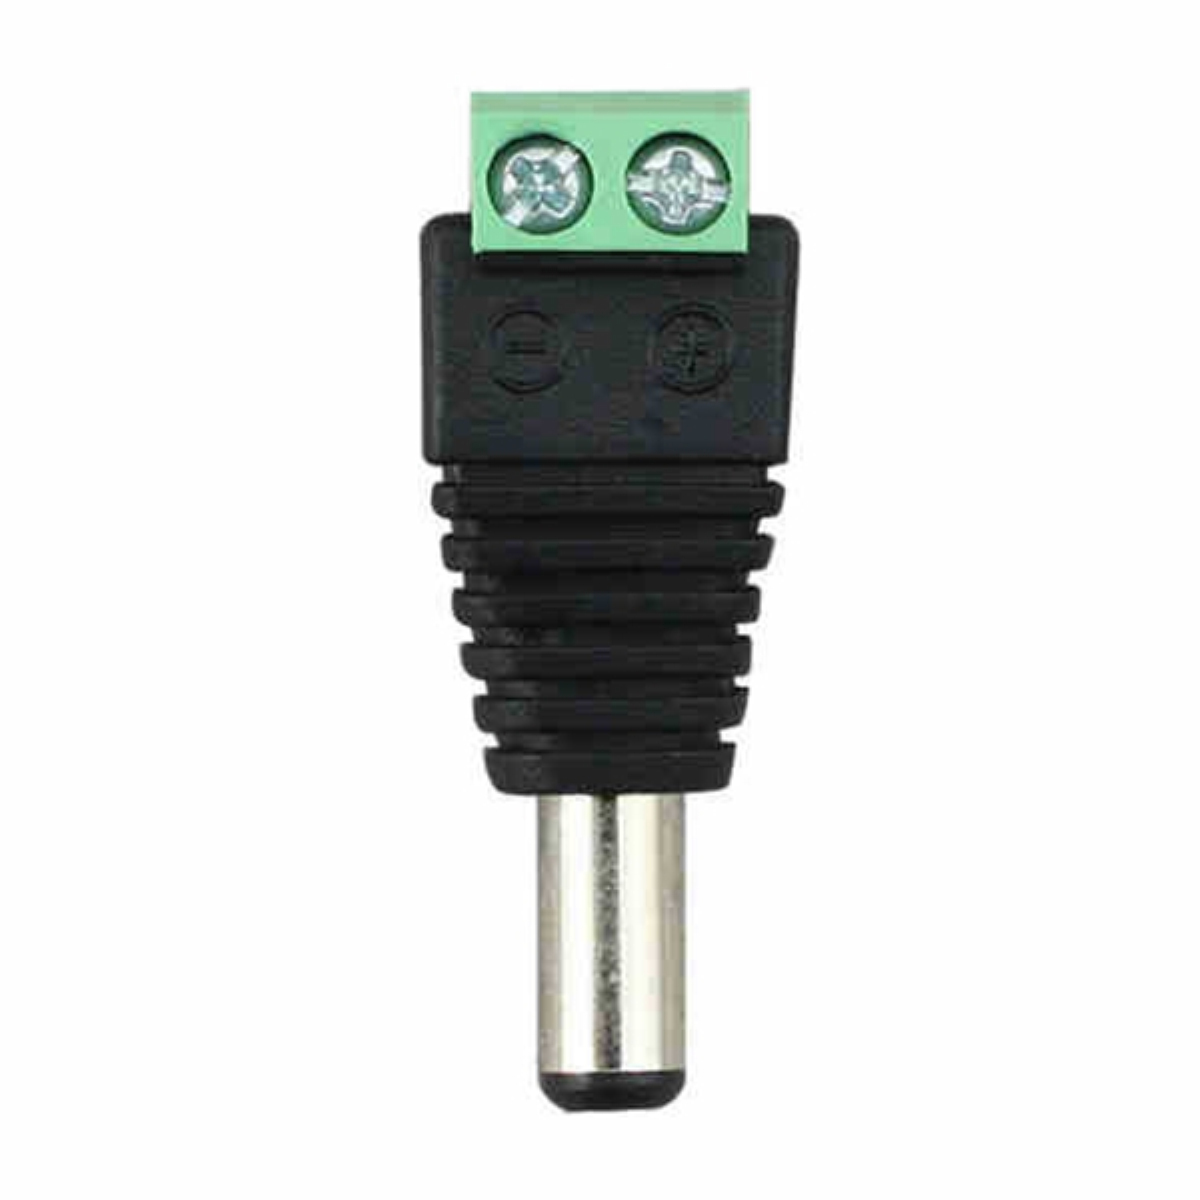 DC5-24V-5A-Human-Infrared-Motion-Sensor-Controller-LED-Strip-Light-Switch--5521mm-Male-Connector-1399653-10